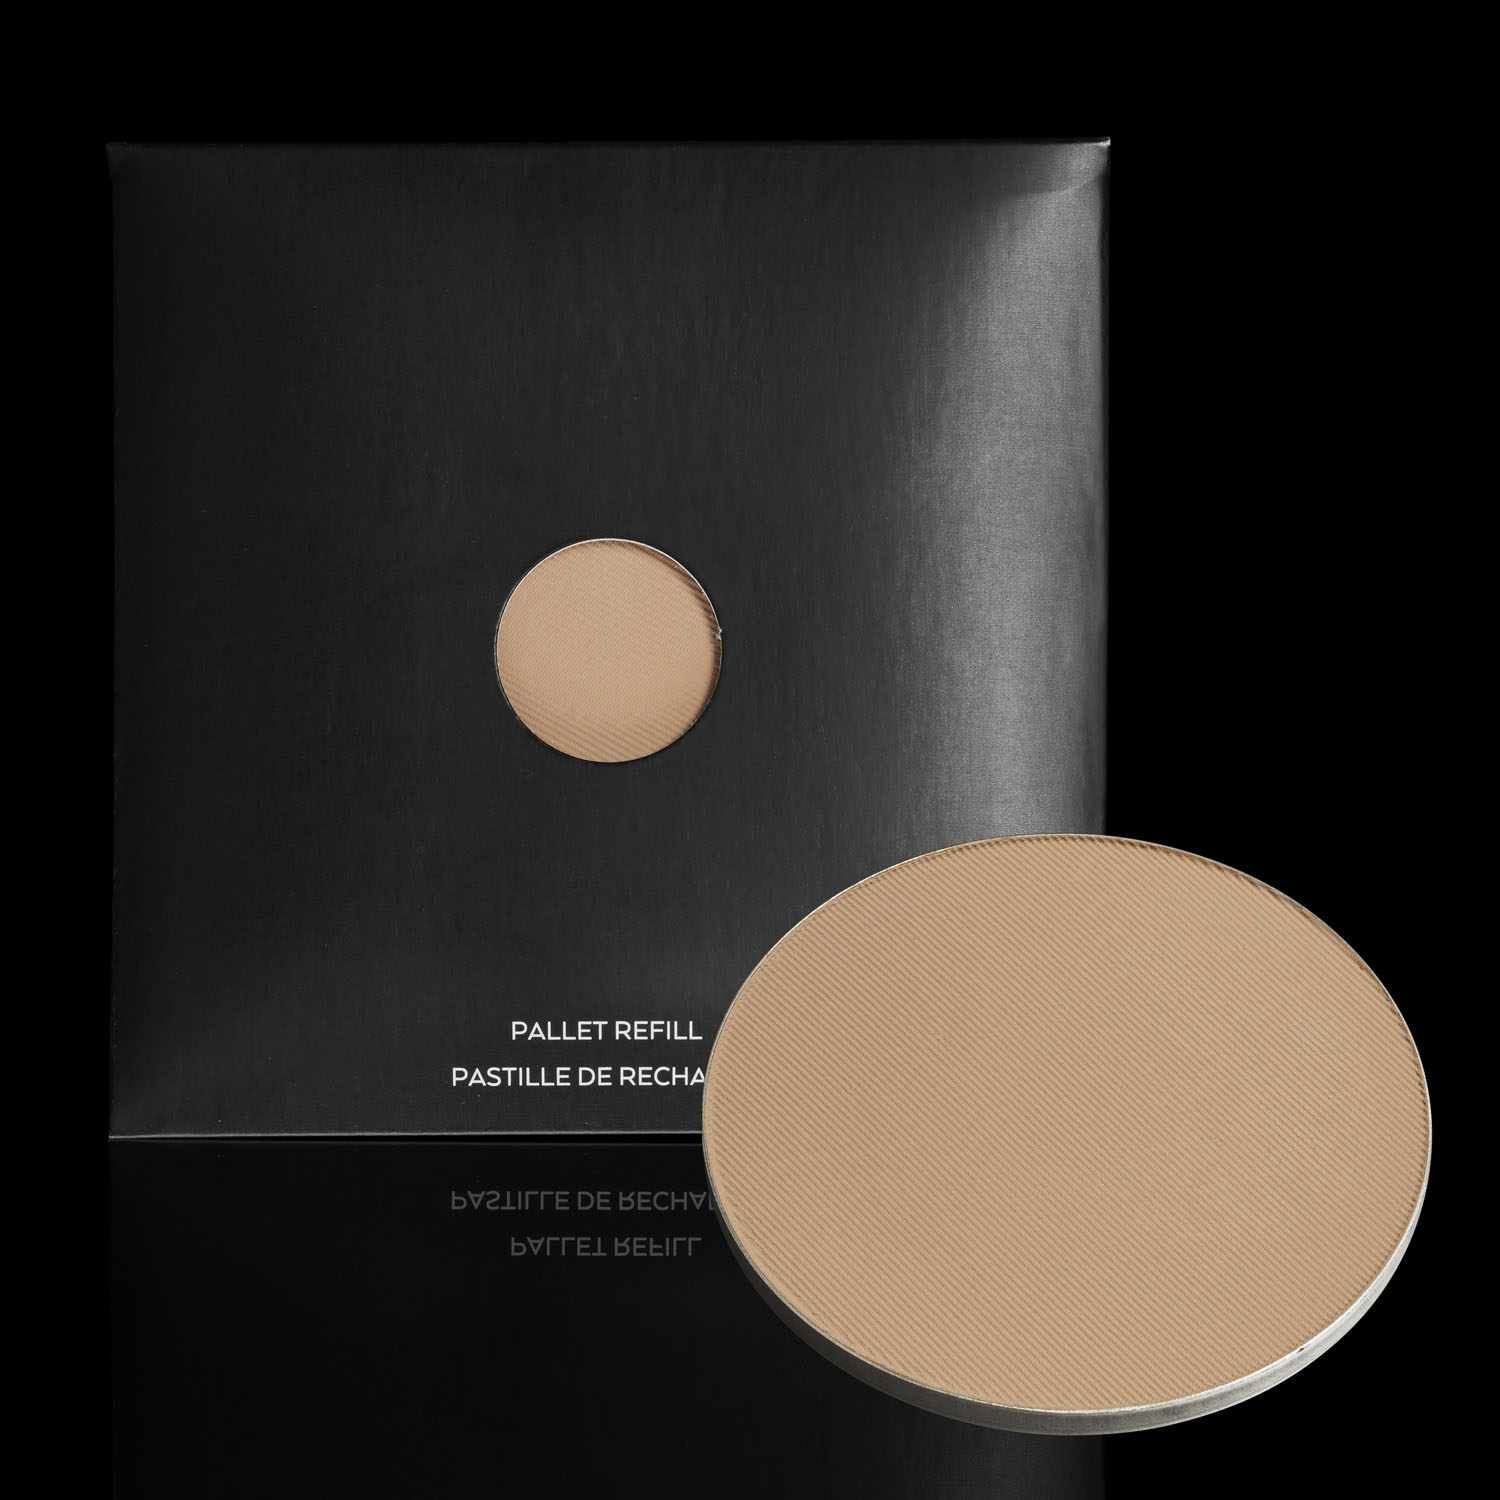 Dual Powder refills, large pan. Wet dry Full Coverage Foundation